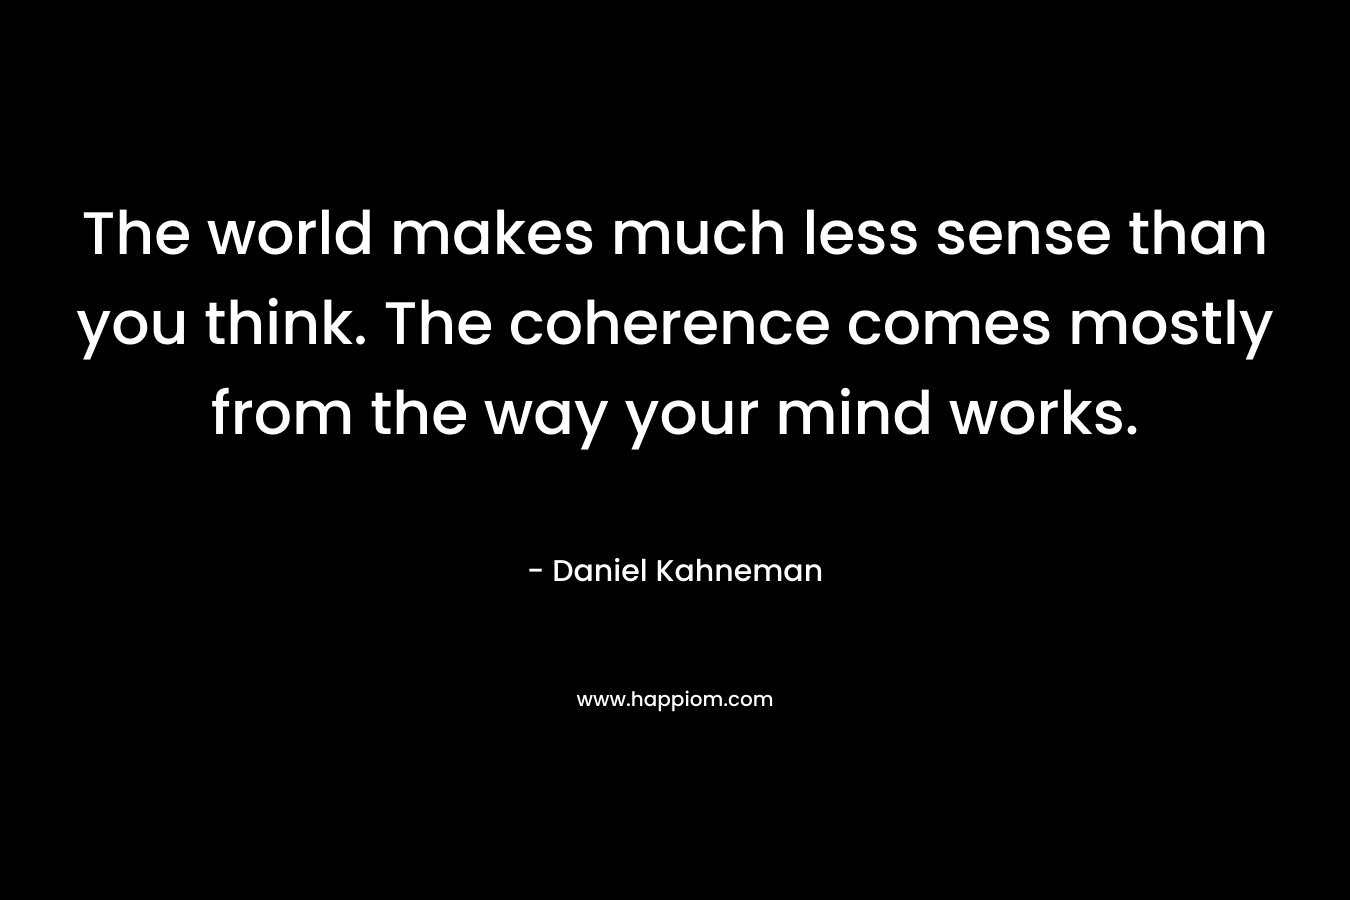 The world makes much less sense than you think. The coherence comes mostly from the way your mind works.